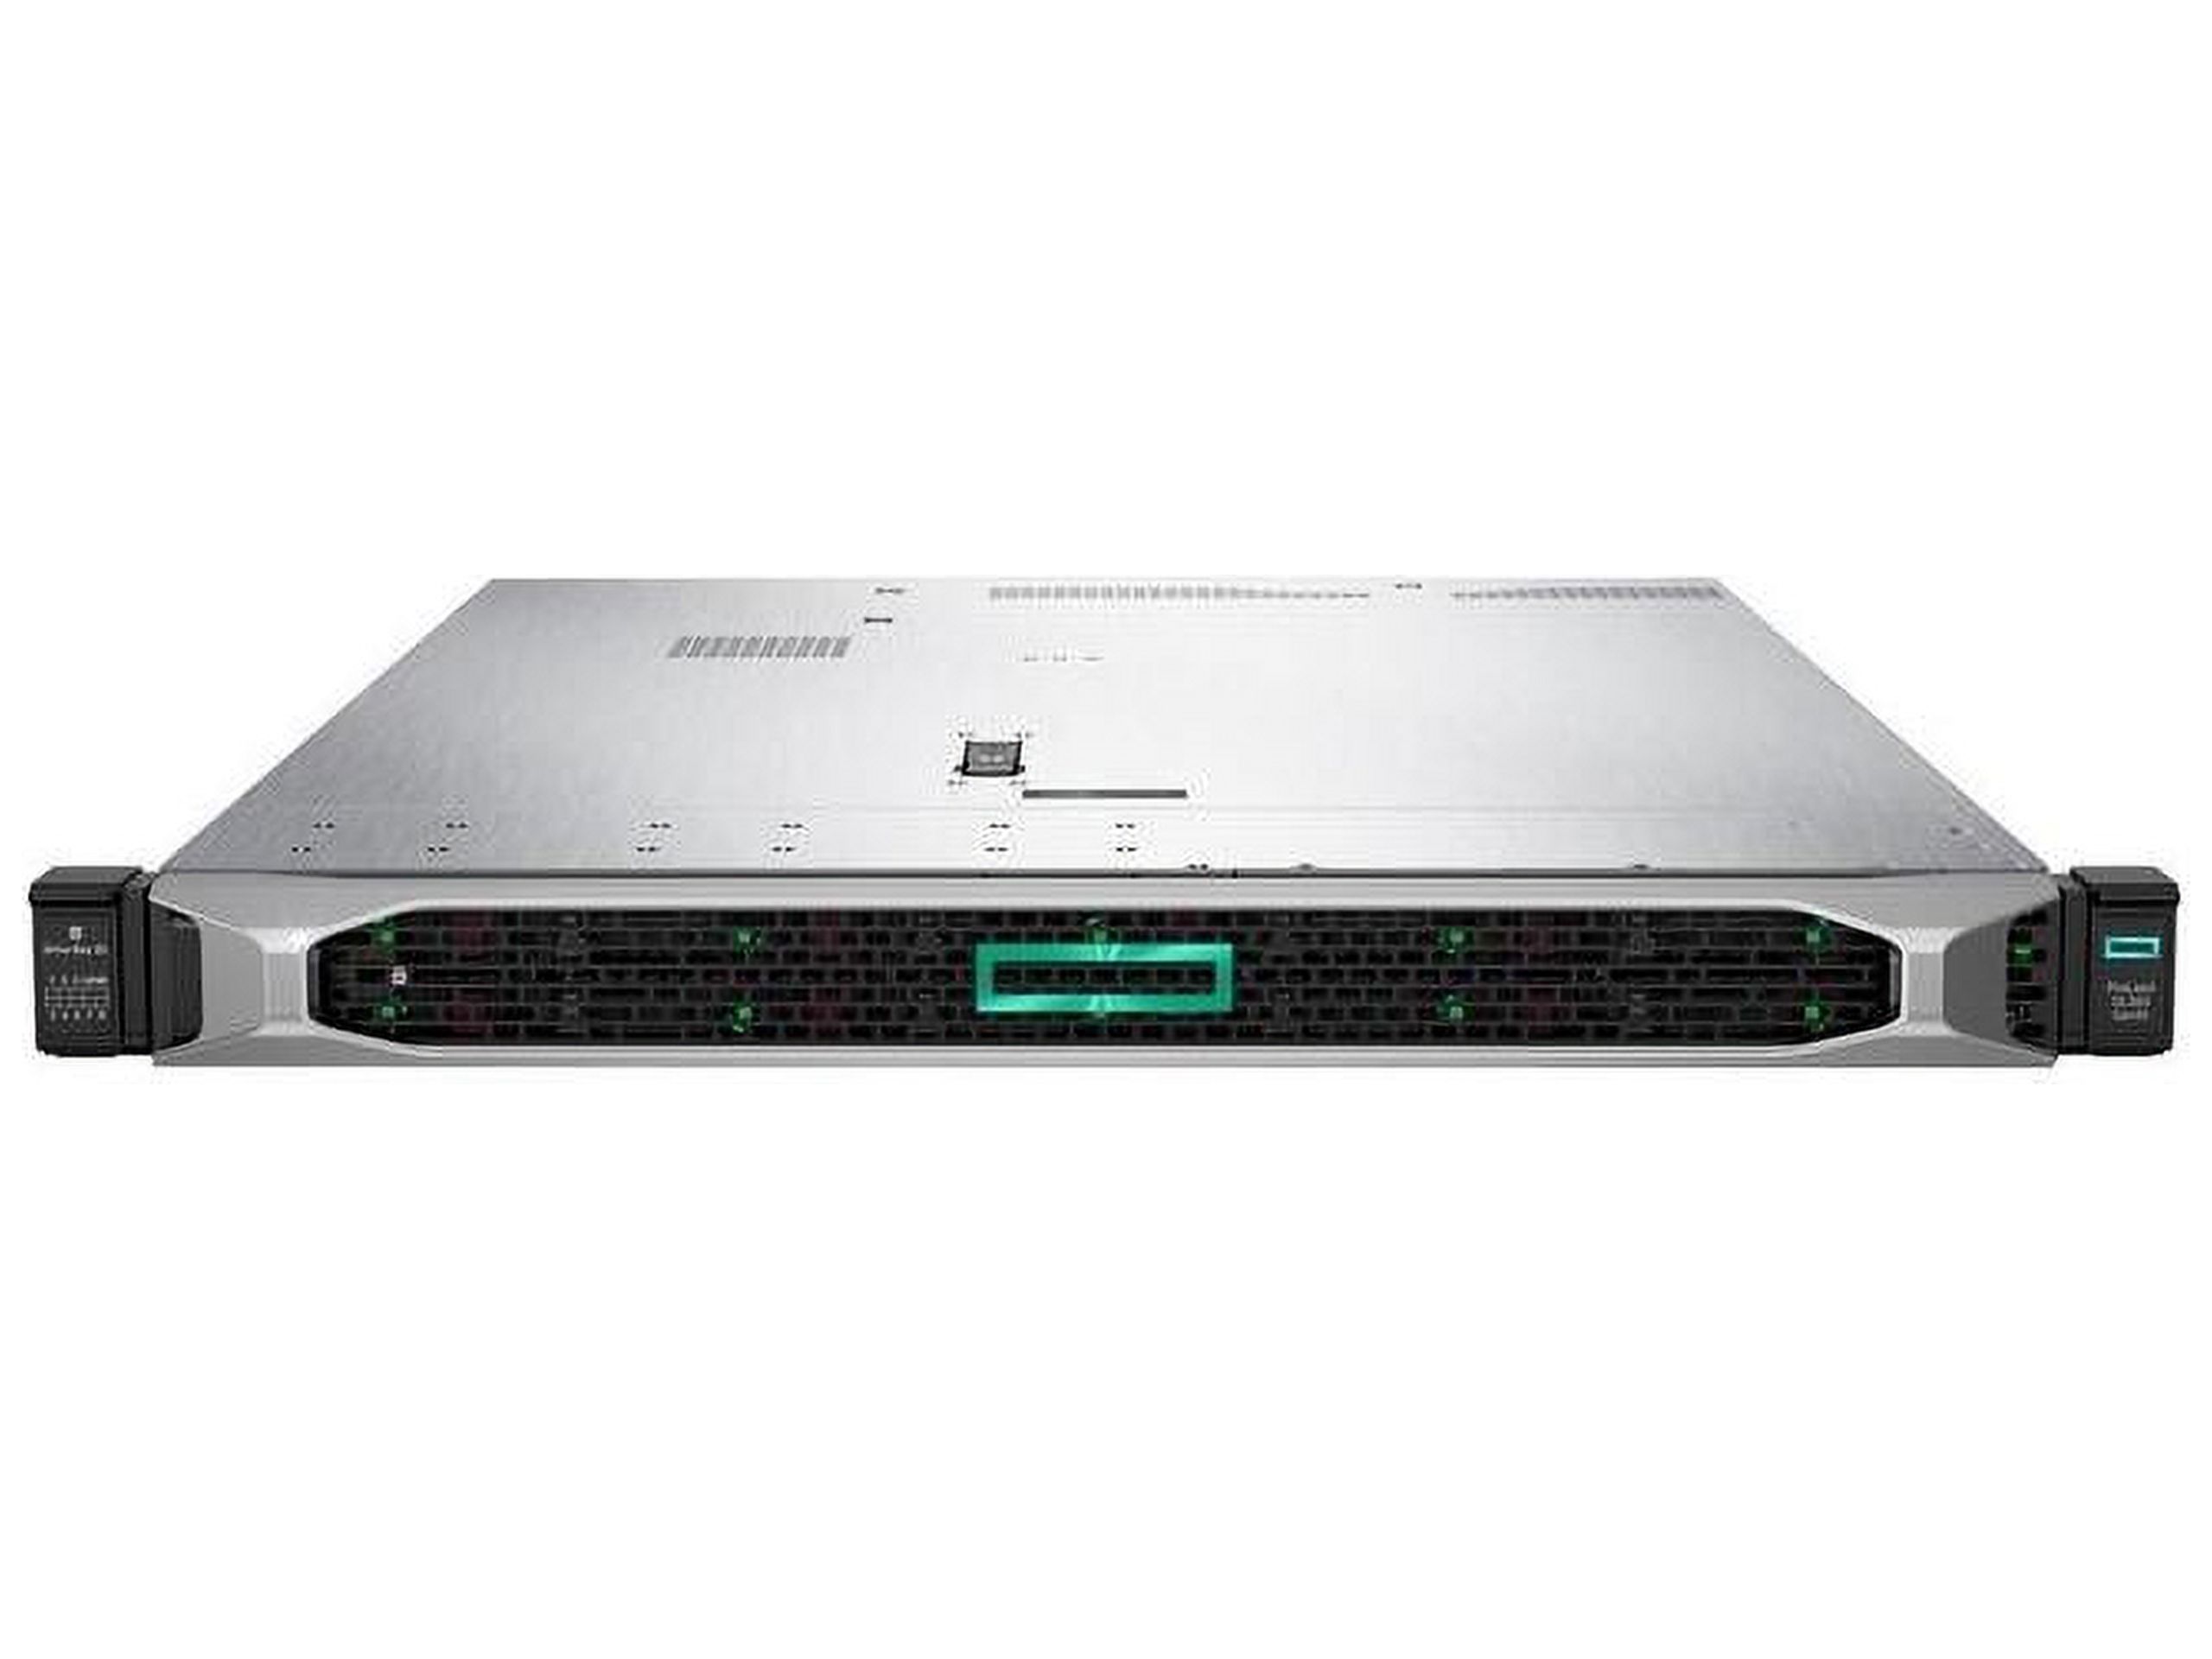 HPE ProLiant DL360 G10 1U Rack Server - 1 x Intel Xeon Silver 4208 2.10 GHz - 32 GB RAM - Serial ATA, 12Gb/s SAS Controller - Intel C621 Chip - 2 Processor Support - 1.54 TB RAM Support - Up to 16 MB - image 2 of 5